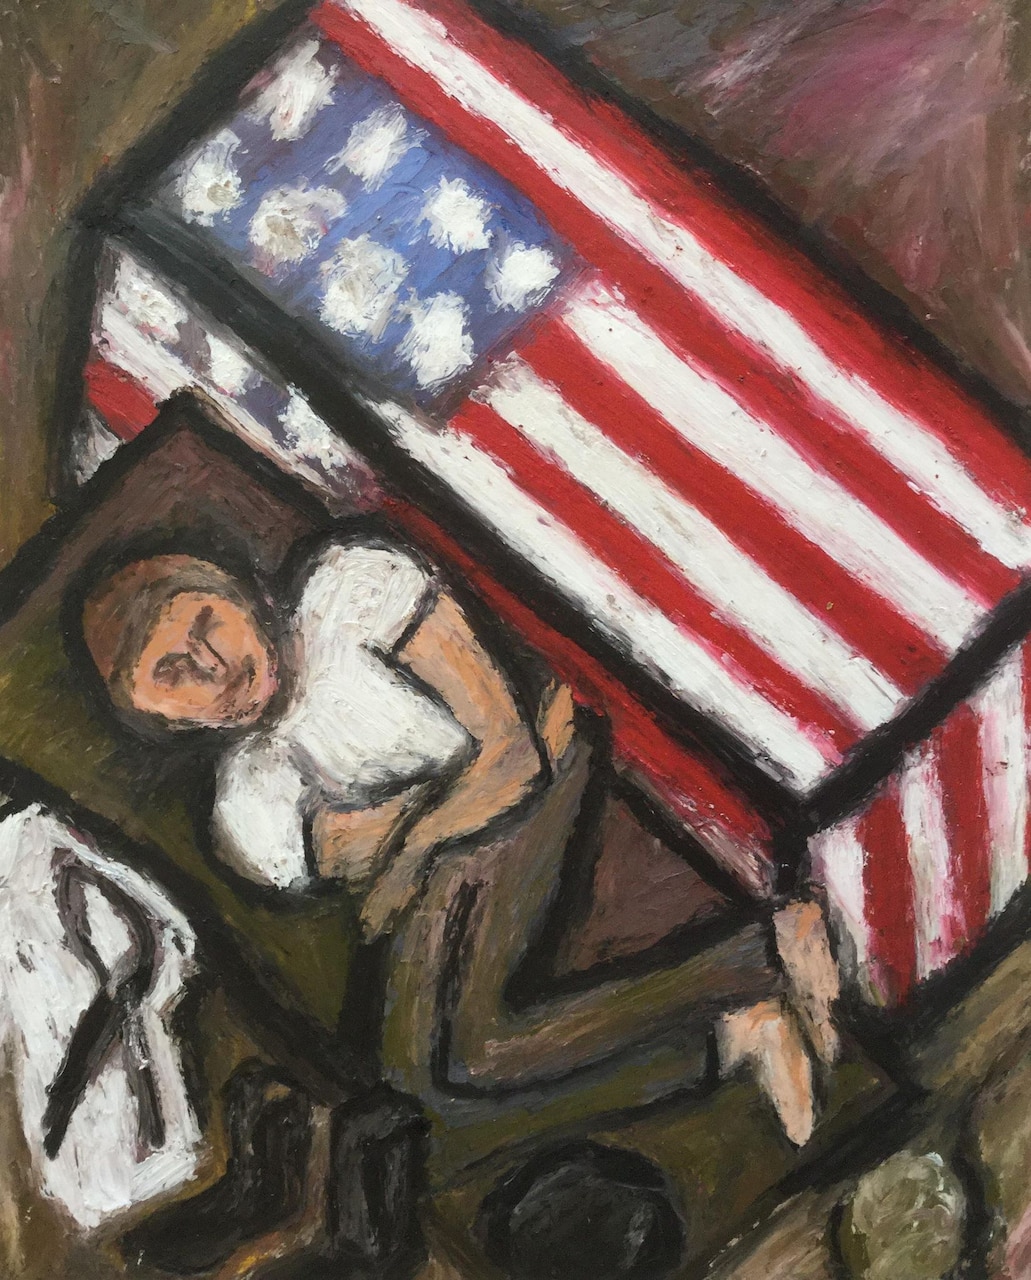 Illustration of a man lying on a cot, grieving. An American flag is displayed next to him.